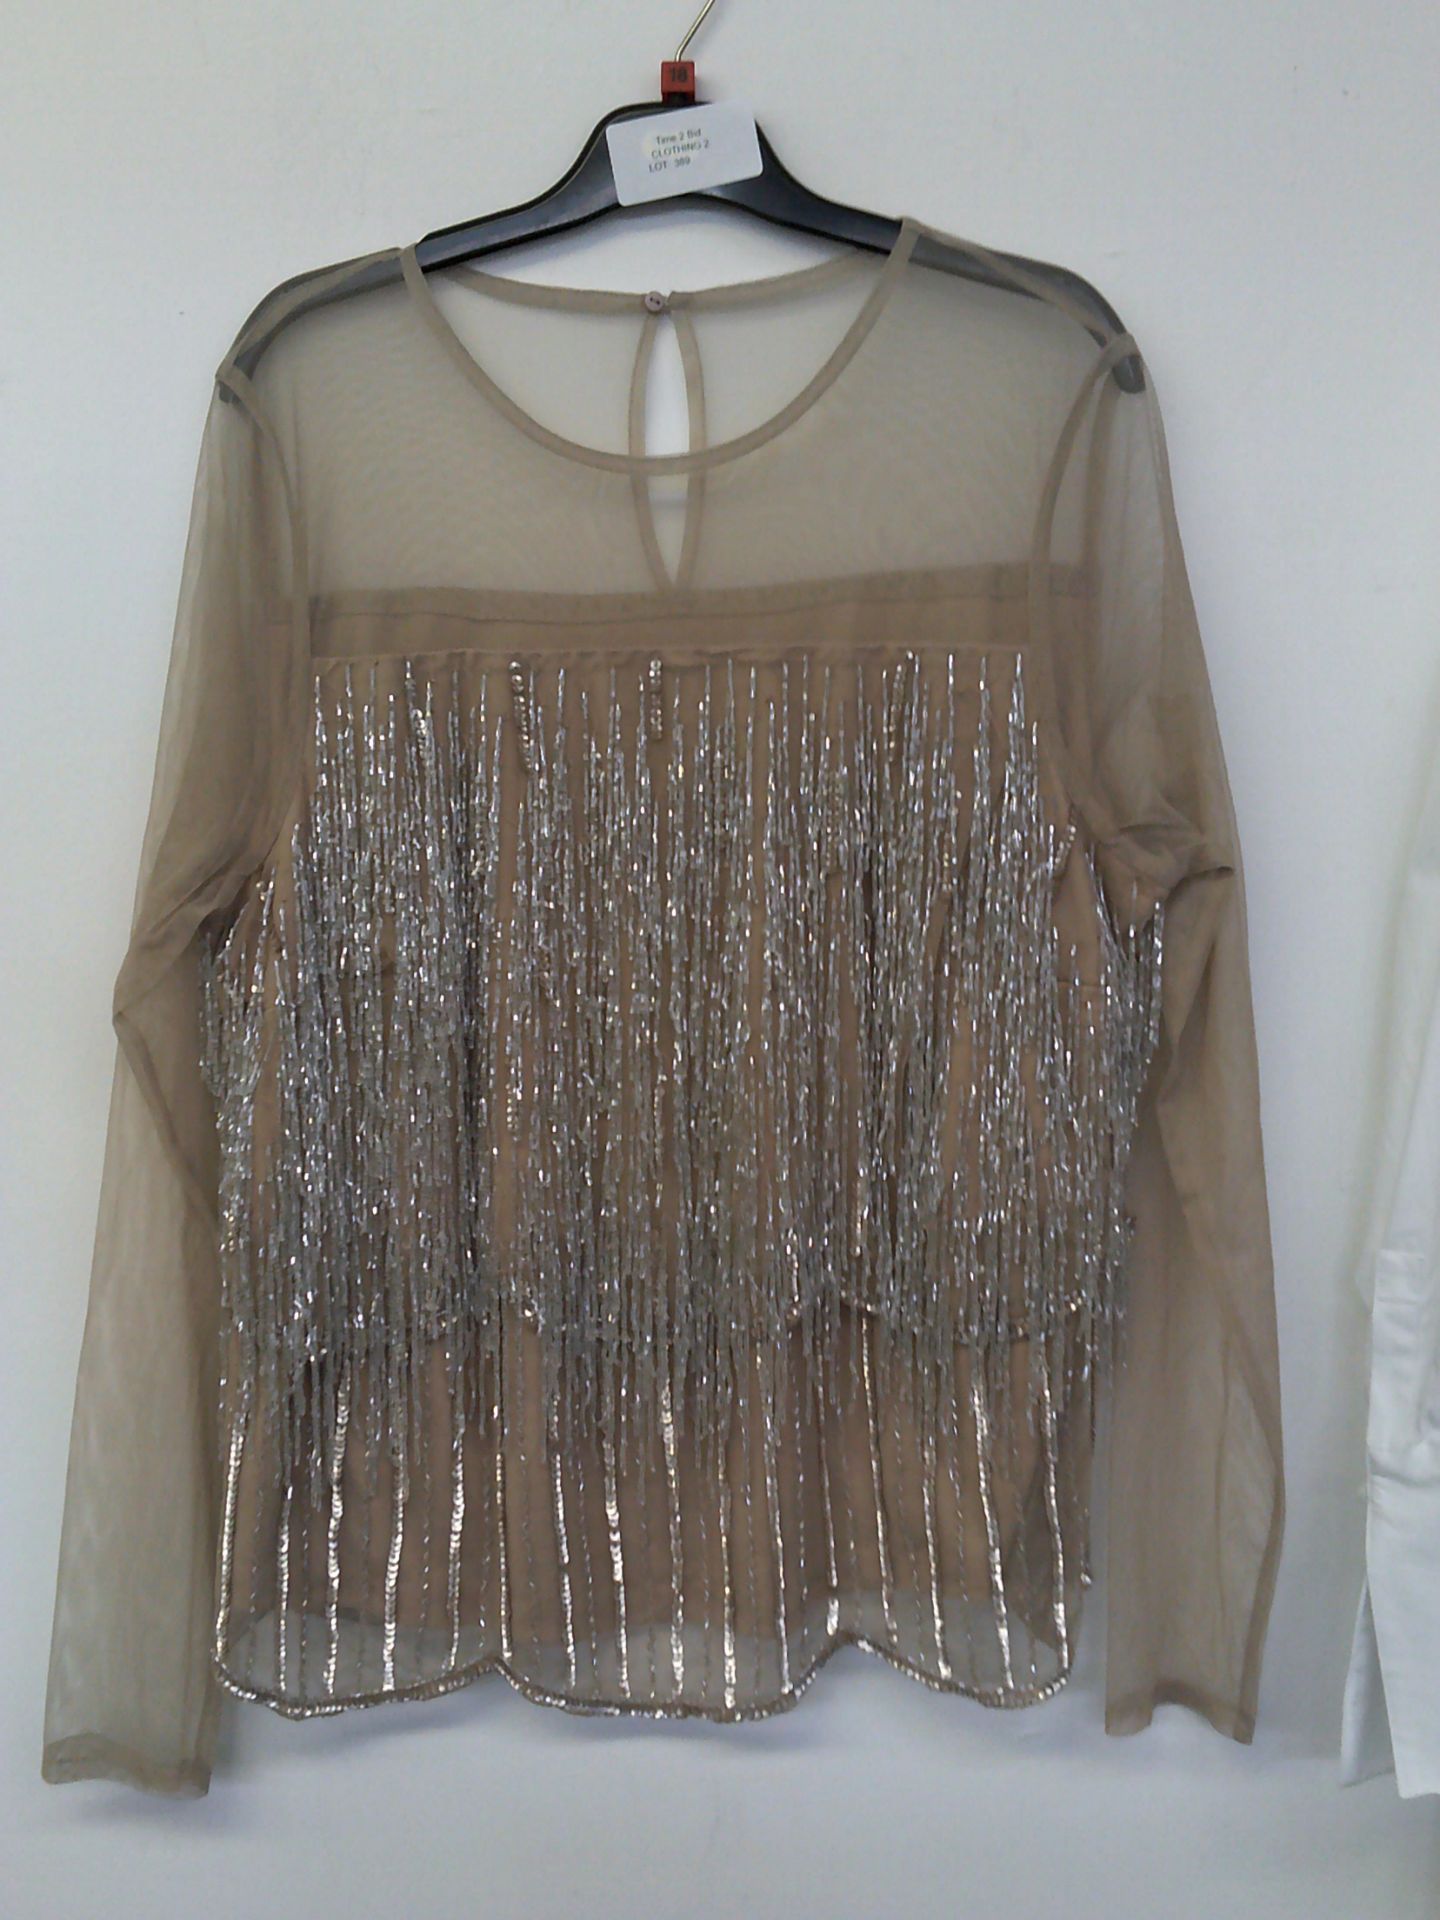 BEADED AND SEQUIN TOP SIZE 18